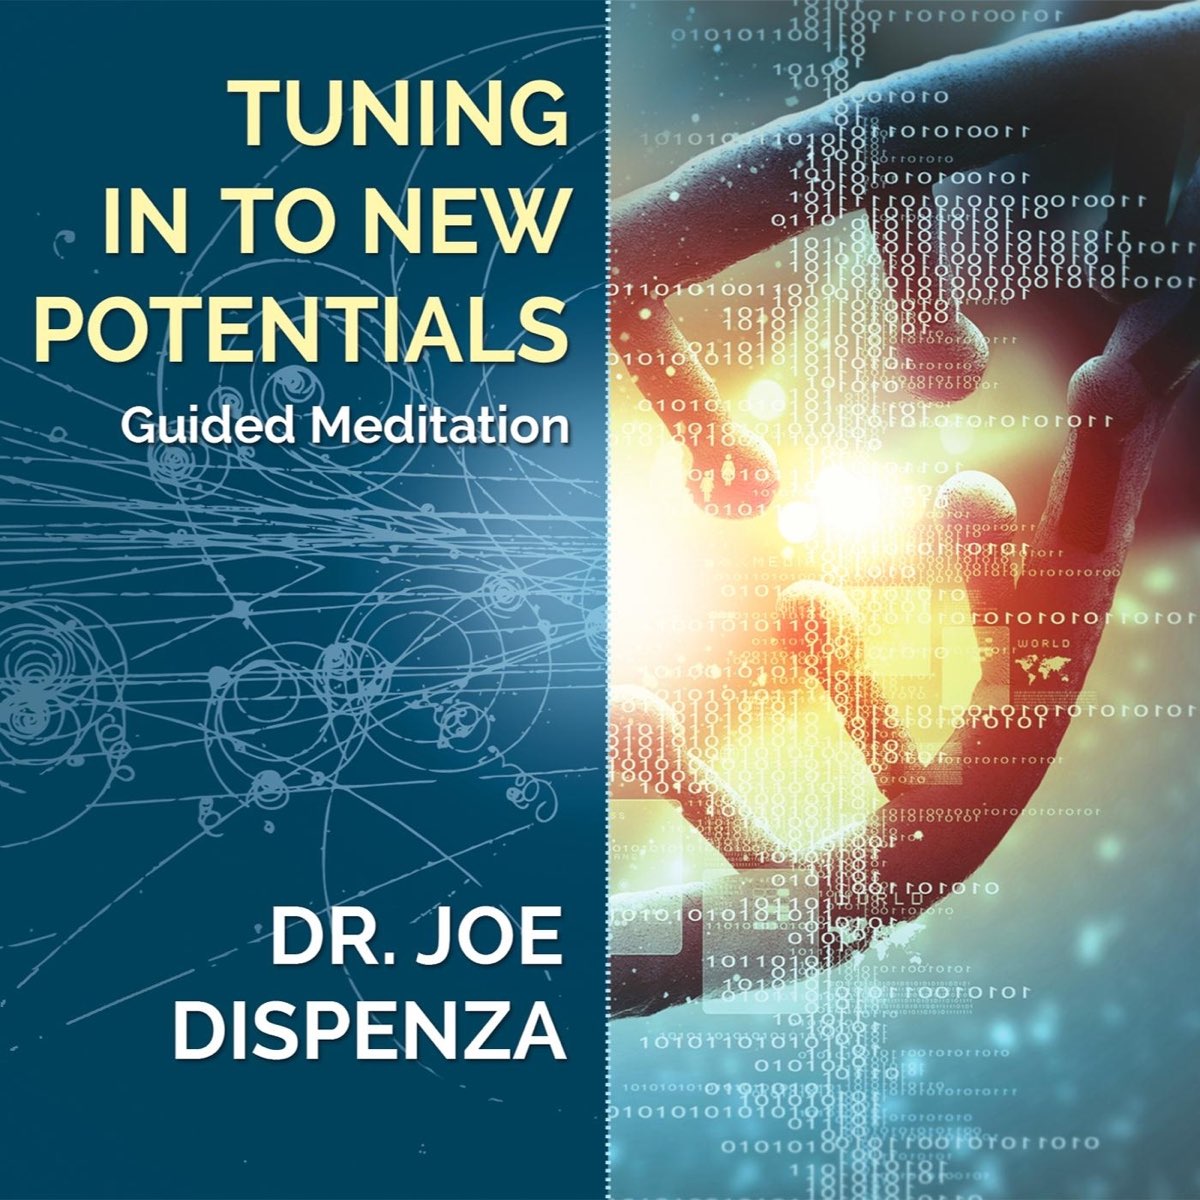 Tuning in to New Potentials by Dr. Joe Dispenza on iTunes